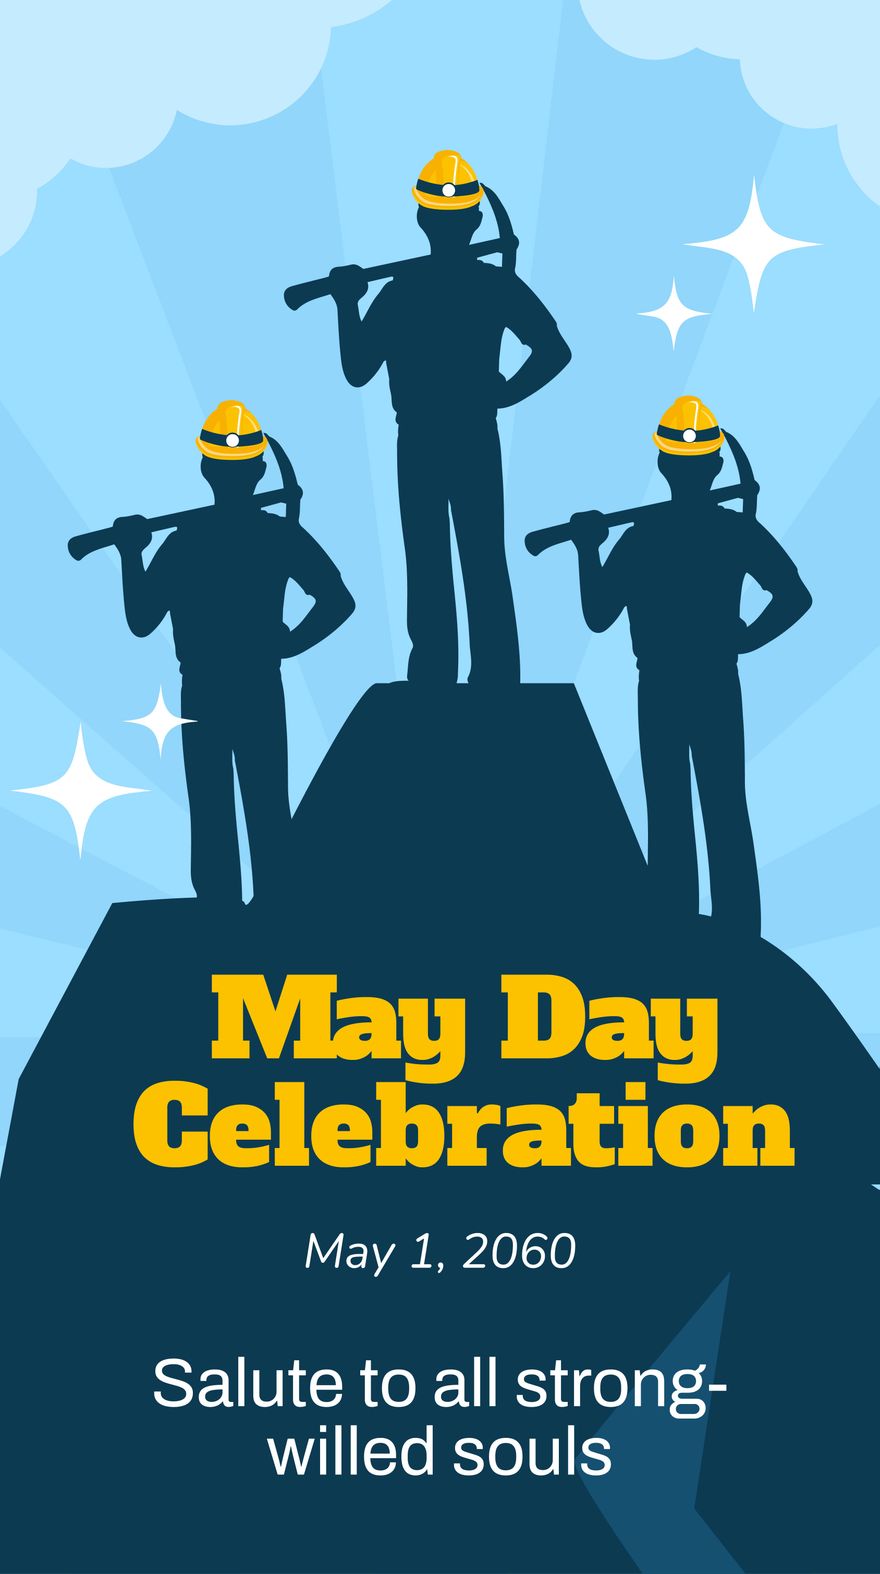 Free May Day Flyer Background in PDF, Illustrator, PSD, EPS, SVG, JPG, PNG